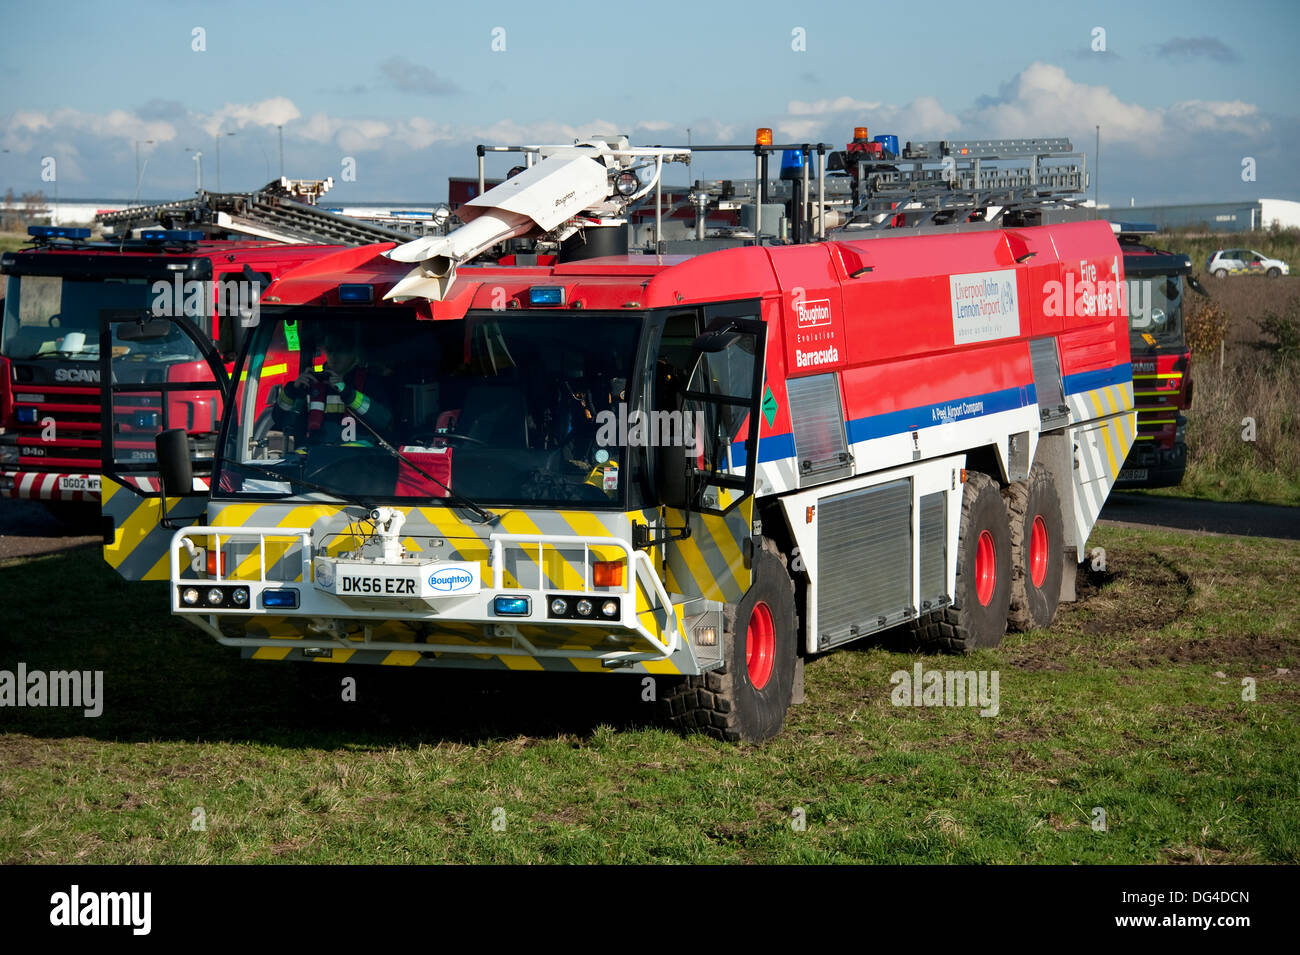 Airport Fire Truck Foam Cannon CAA Aviation Safety Stock Photo